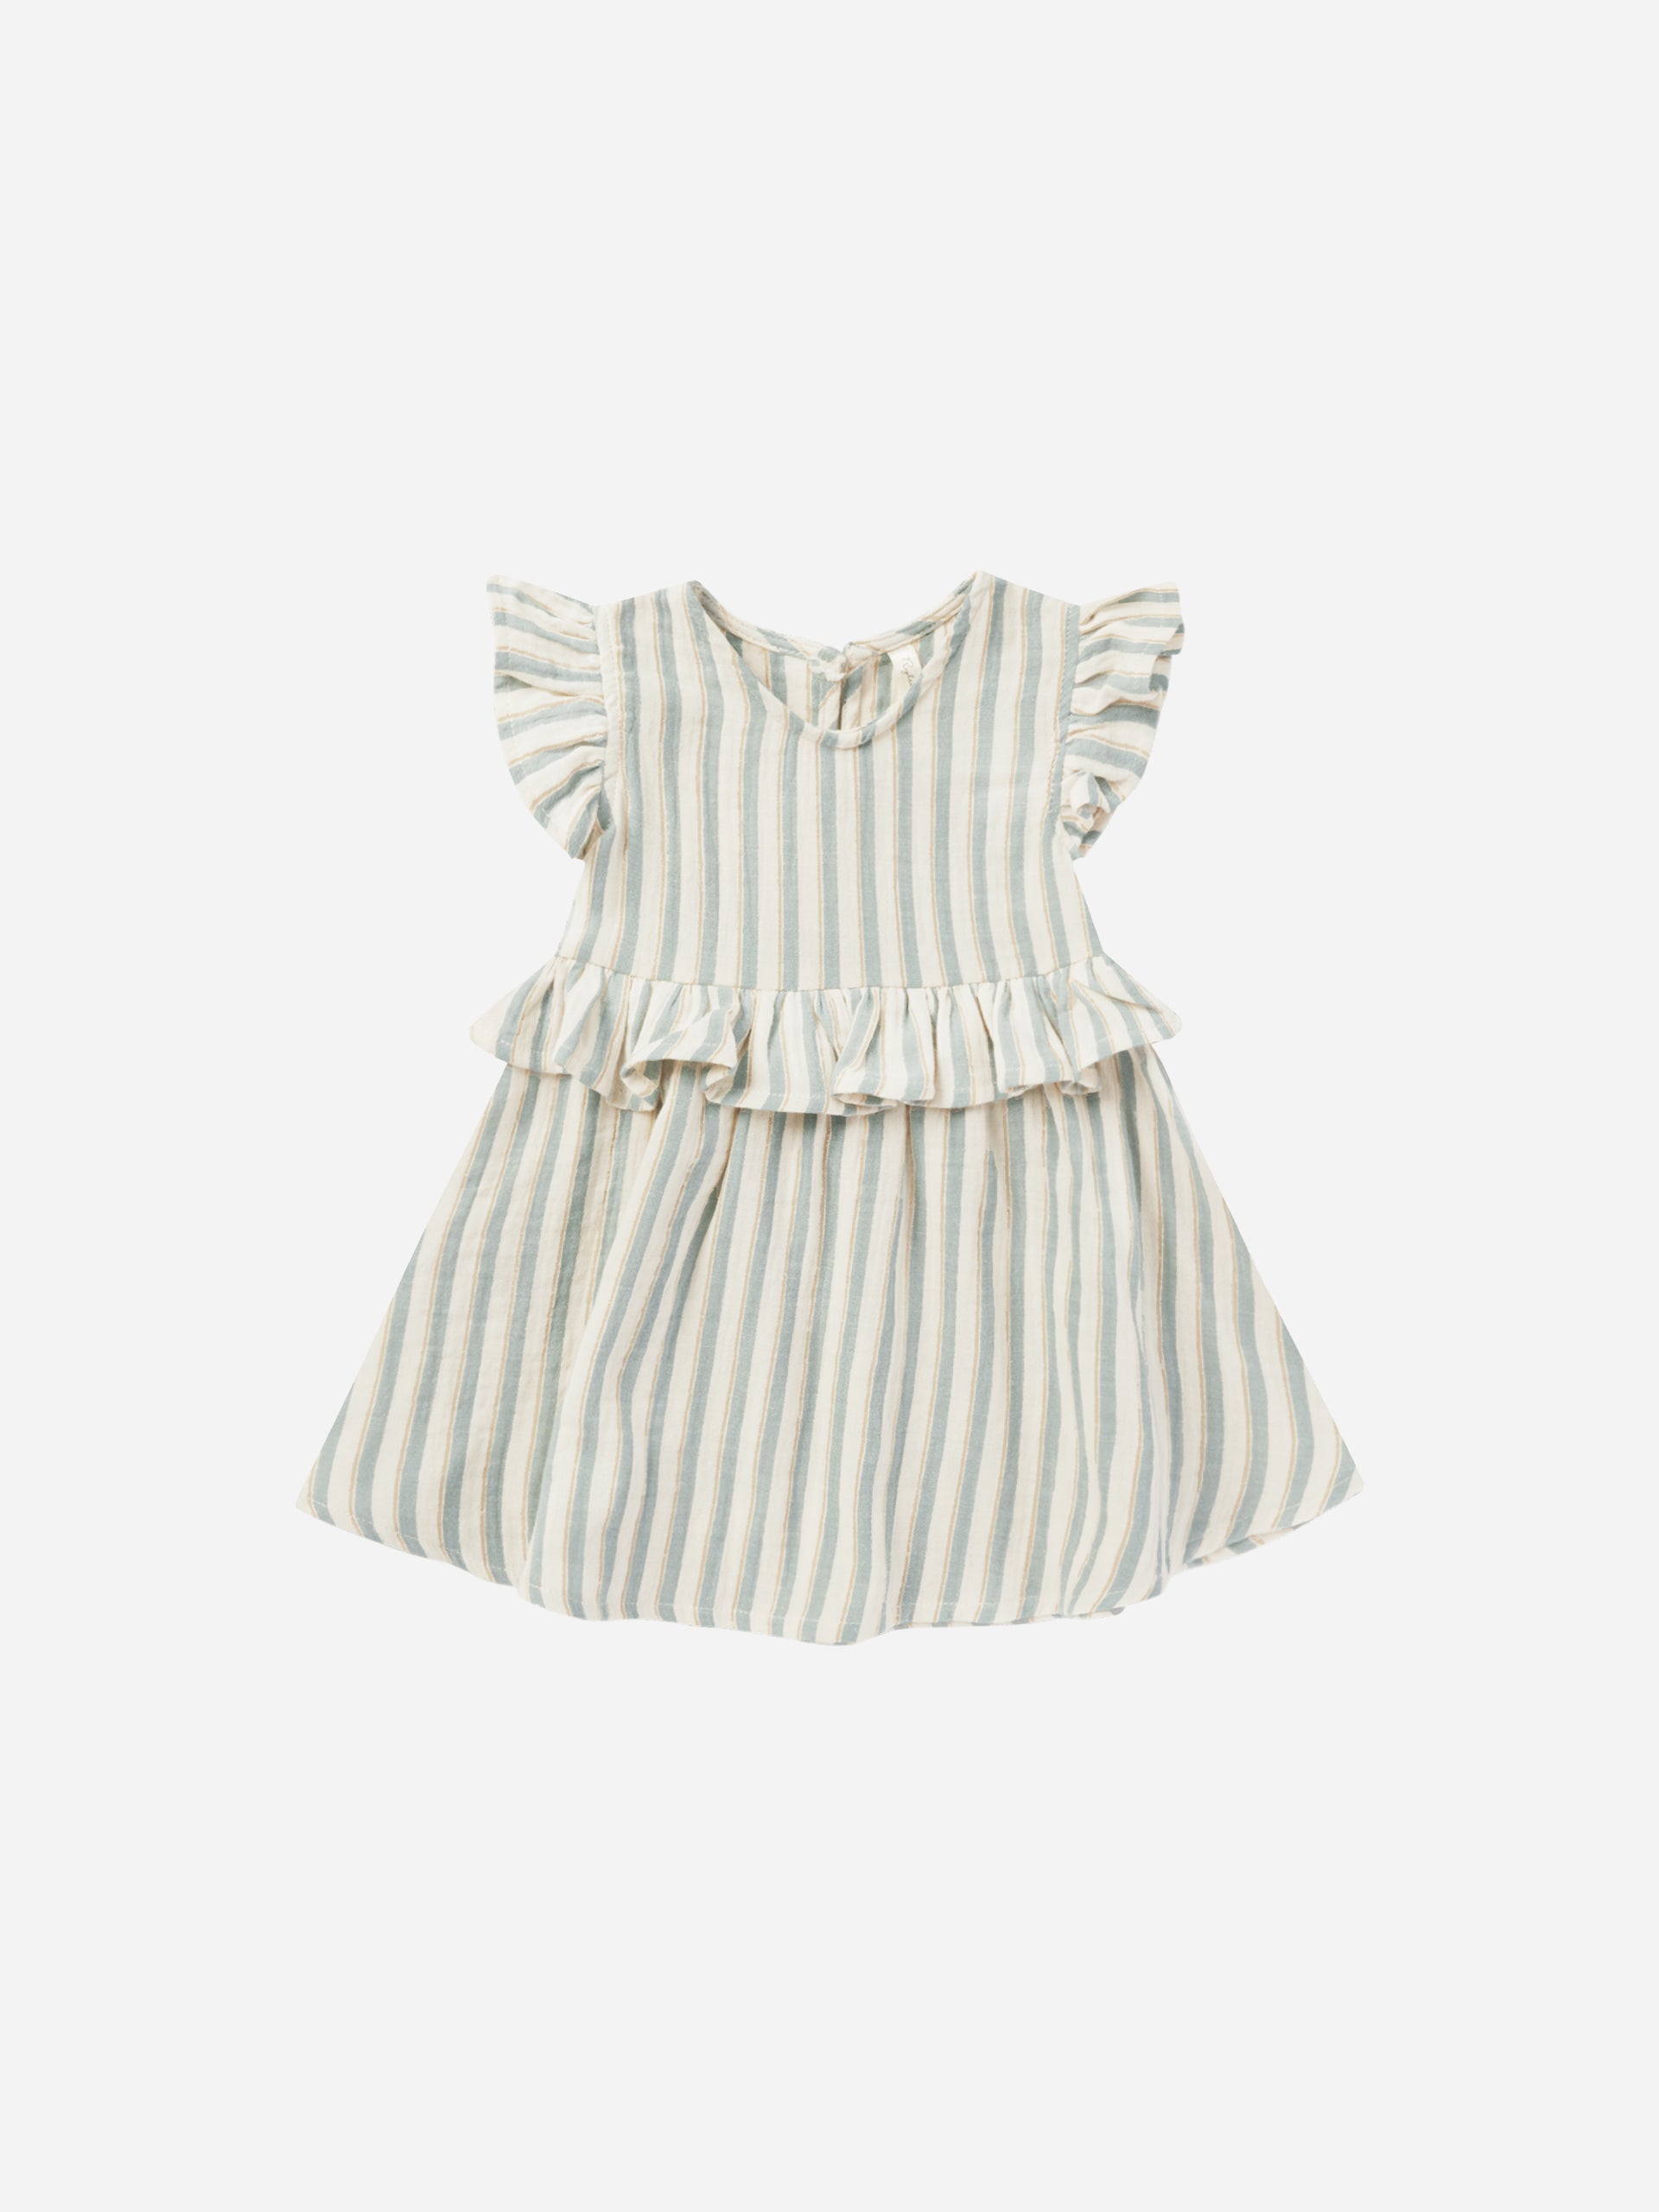 Brielle Dress || Ocean Stripe - Rylee + Cru | Kids Clothes | Trendy Baby Clothes | Modern Infant Outfits |